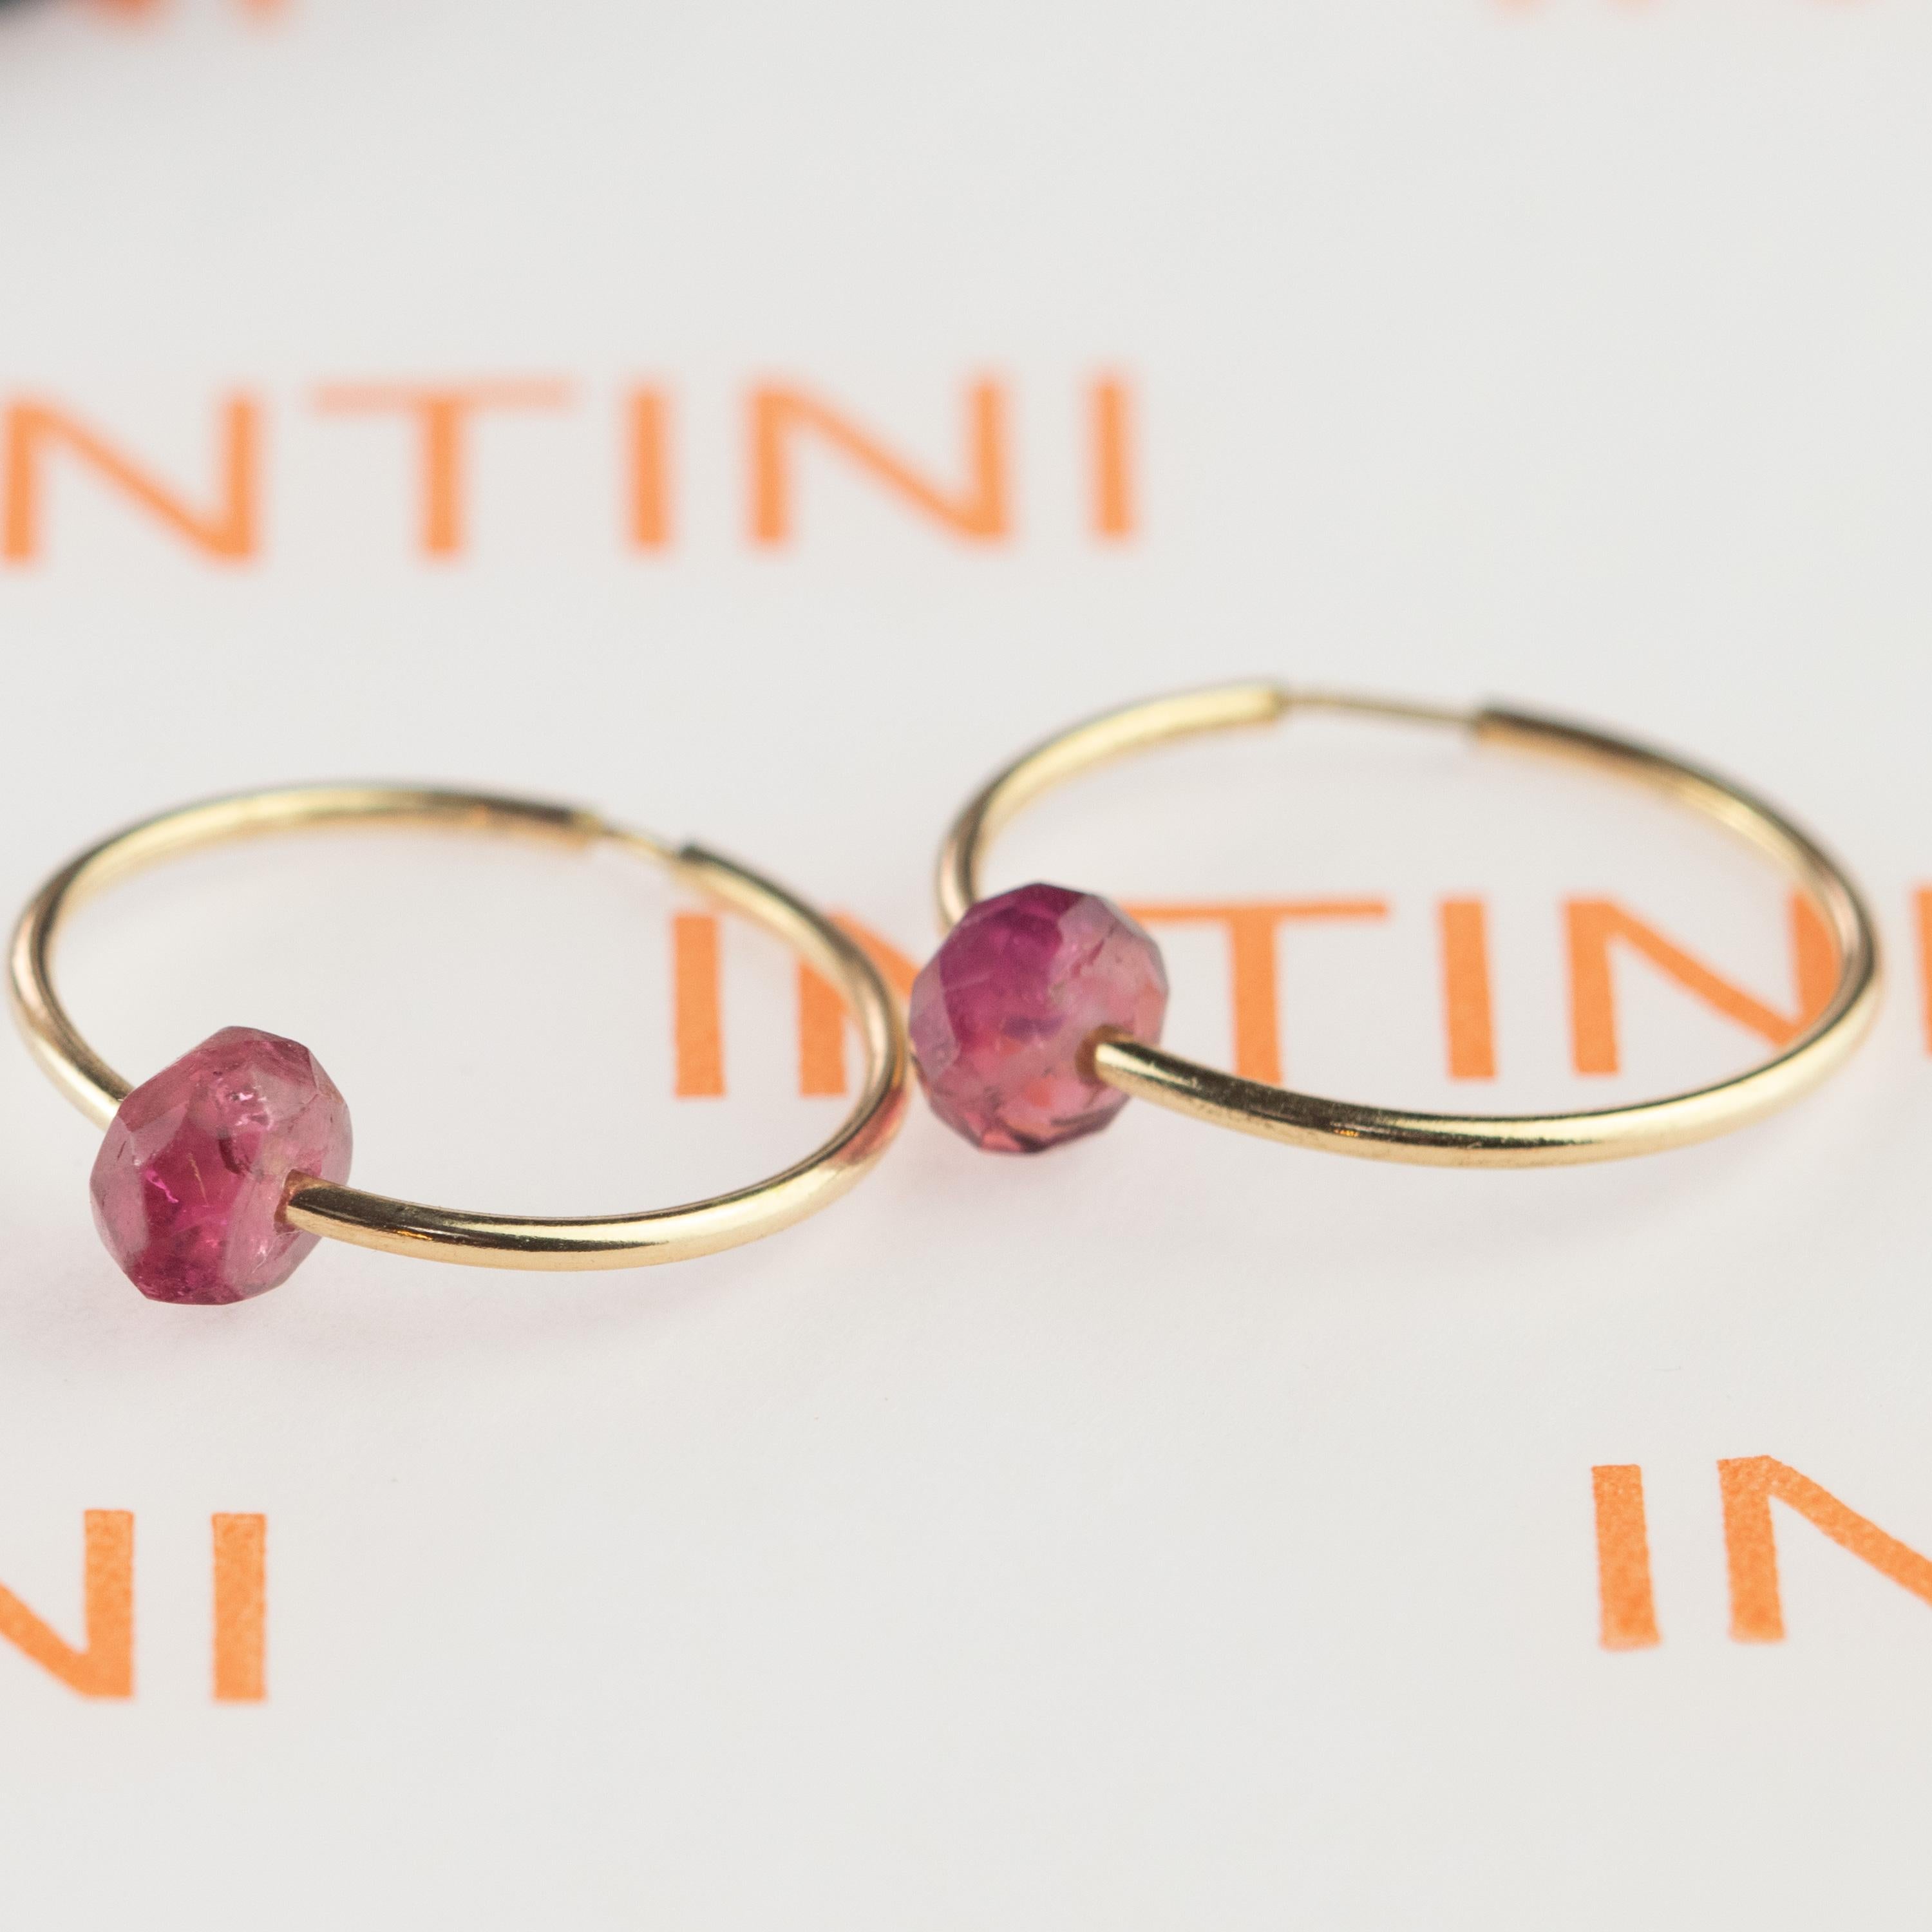 Signature INTINI Jewels planet earrings. Contemporary earring design in 18k yellow gold with a precious and luminous Tourmaline rondelle.  Passion and intensity mixed in one jewel. Delight yourself with a strong, minimalist design, just for a